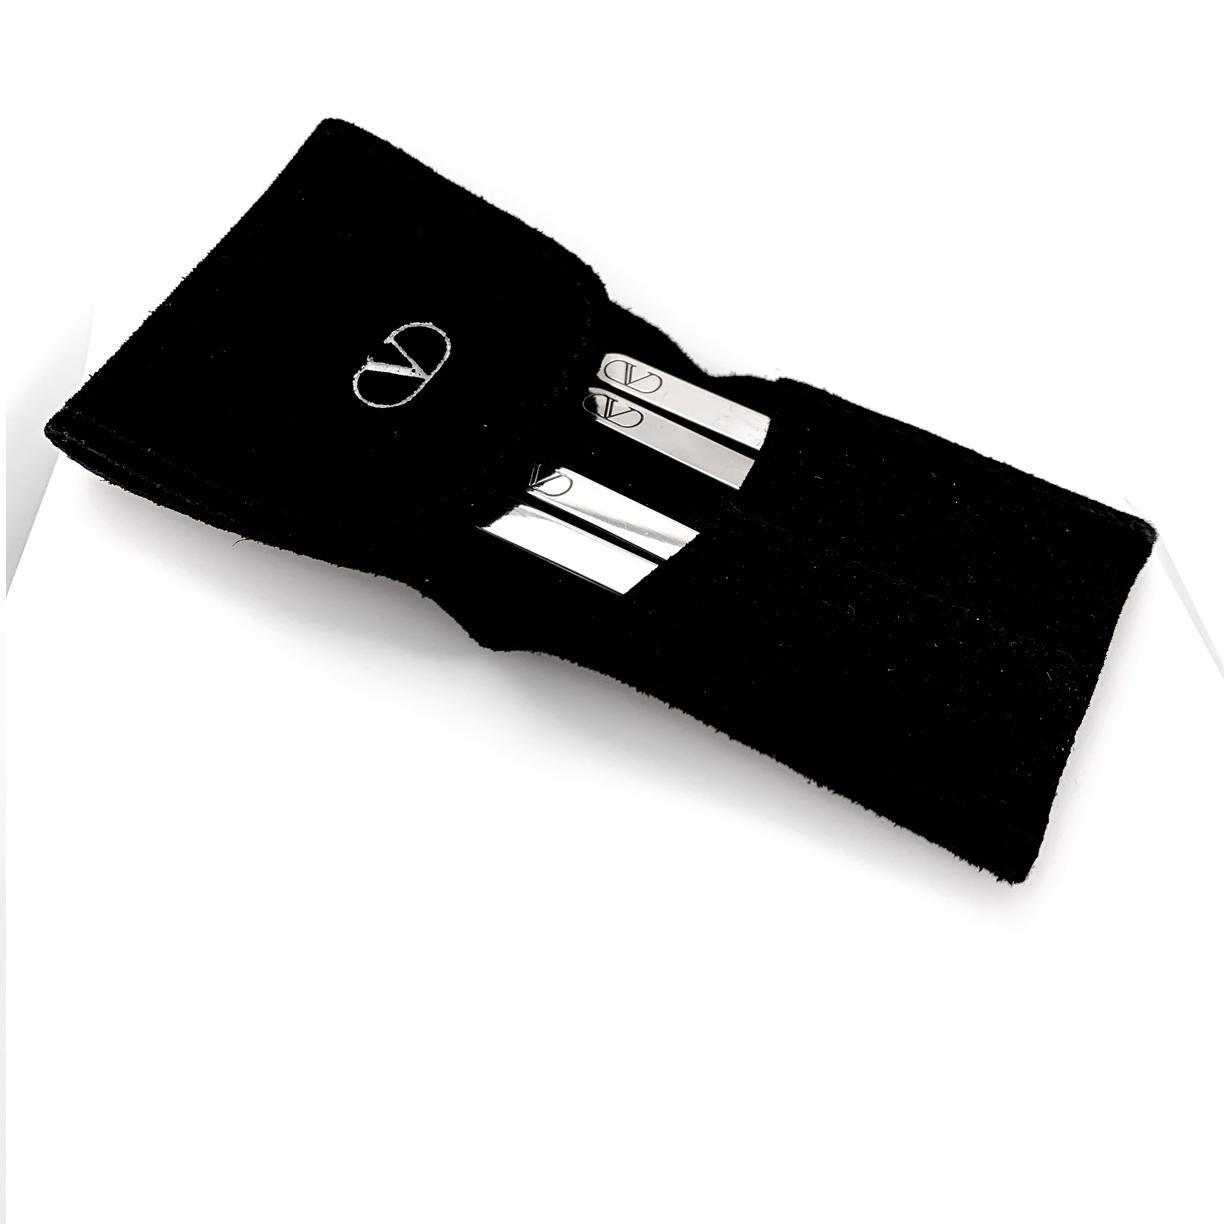 For the well-appointed gentleman:  a set of four sterling silver collar stays.  Made by VALENTINO and stamped with the Valentino maker's mark.   In original black suede fold-over pouch with embossed logo.  2.35